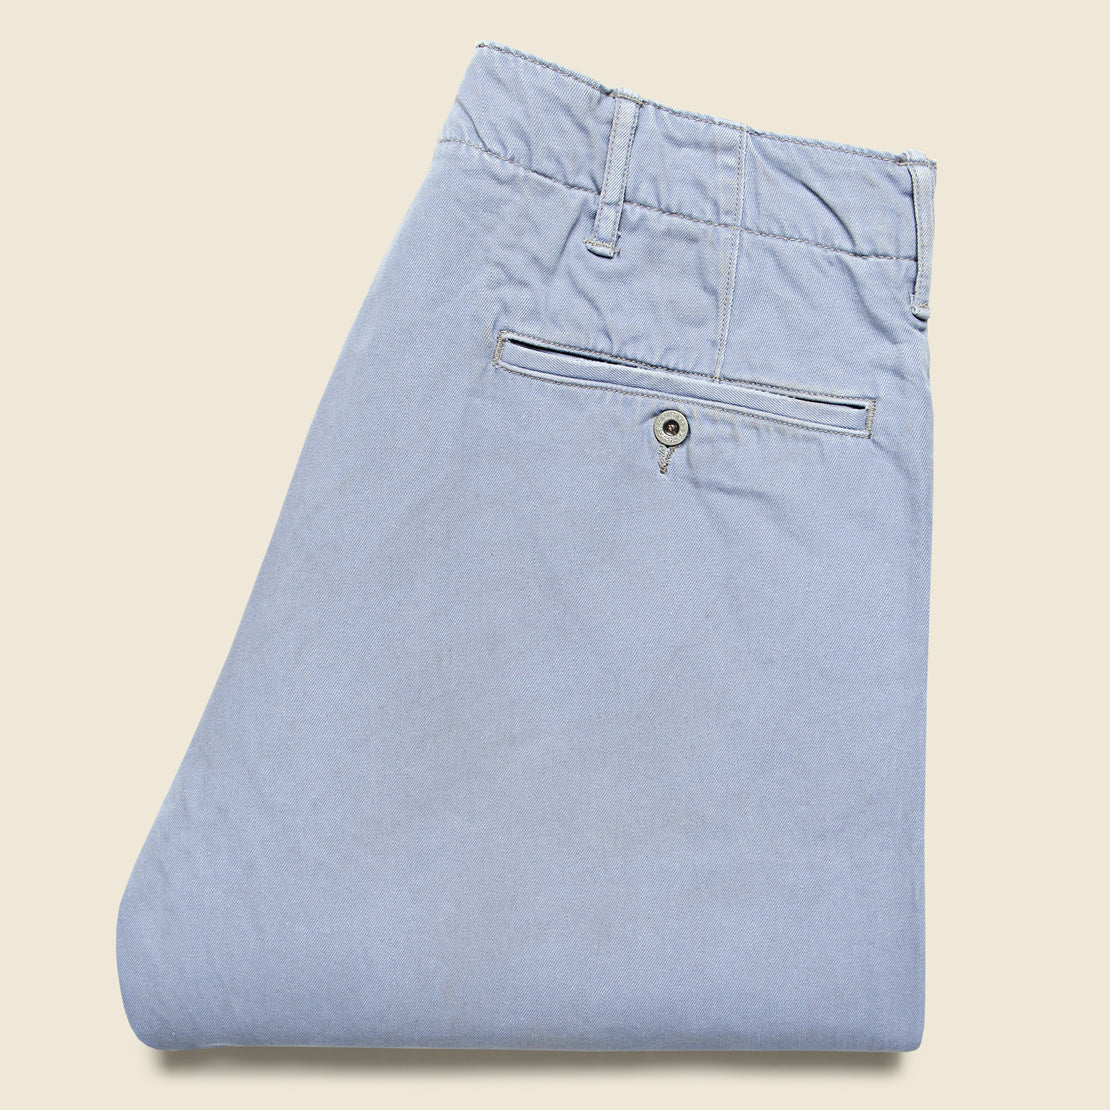 Cotton Field Chino - Steel Blue - RRL - STAG Provisions - Pants - Twill